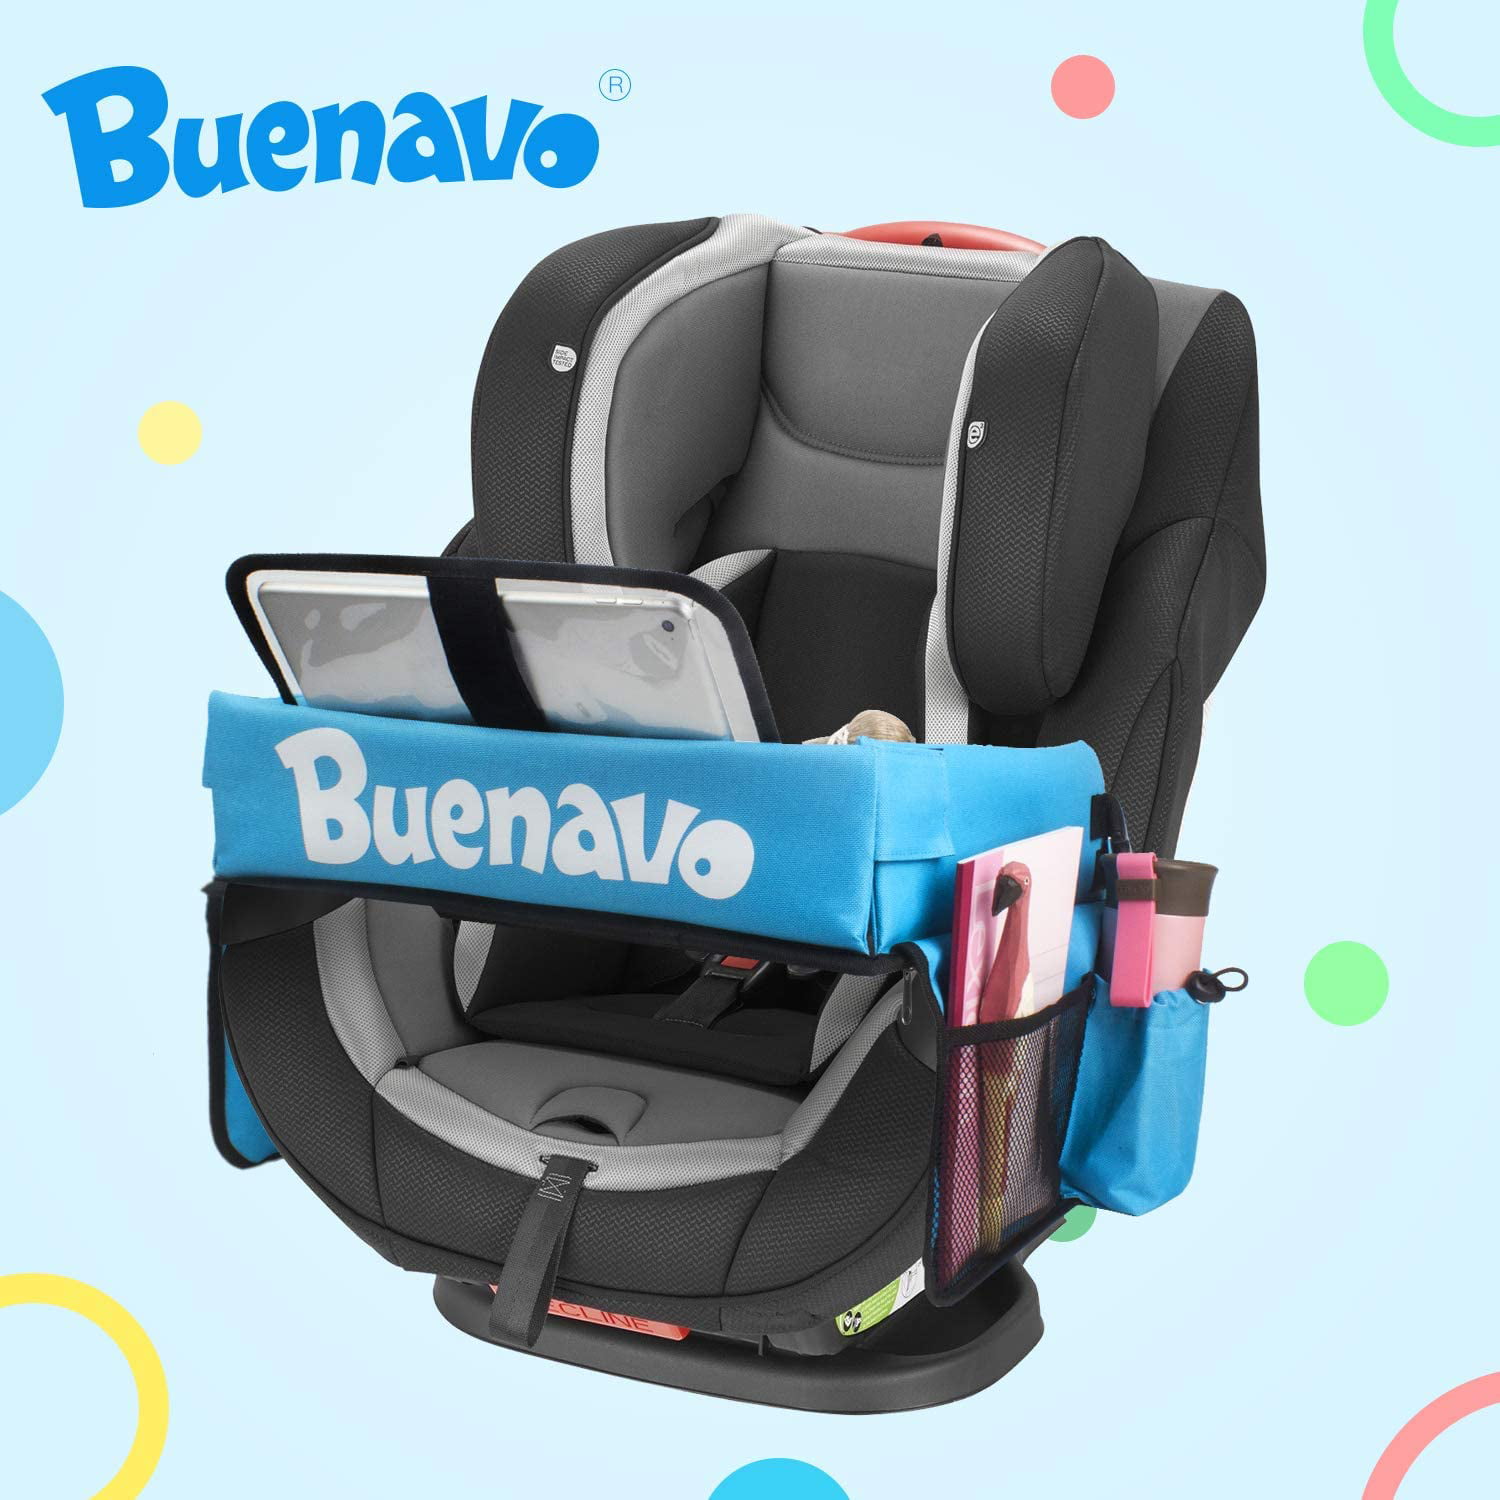 New Version Airplane Waterproof Dry Erase Top Stroller Car Seat Organizer Kids Travel Tray for Kids Toddlers Activities in Car Seat Touch Screen iPad Holder Side Pocket & Water Bottle Holder 